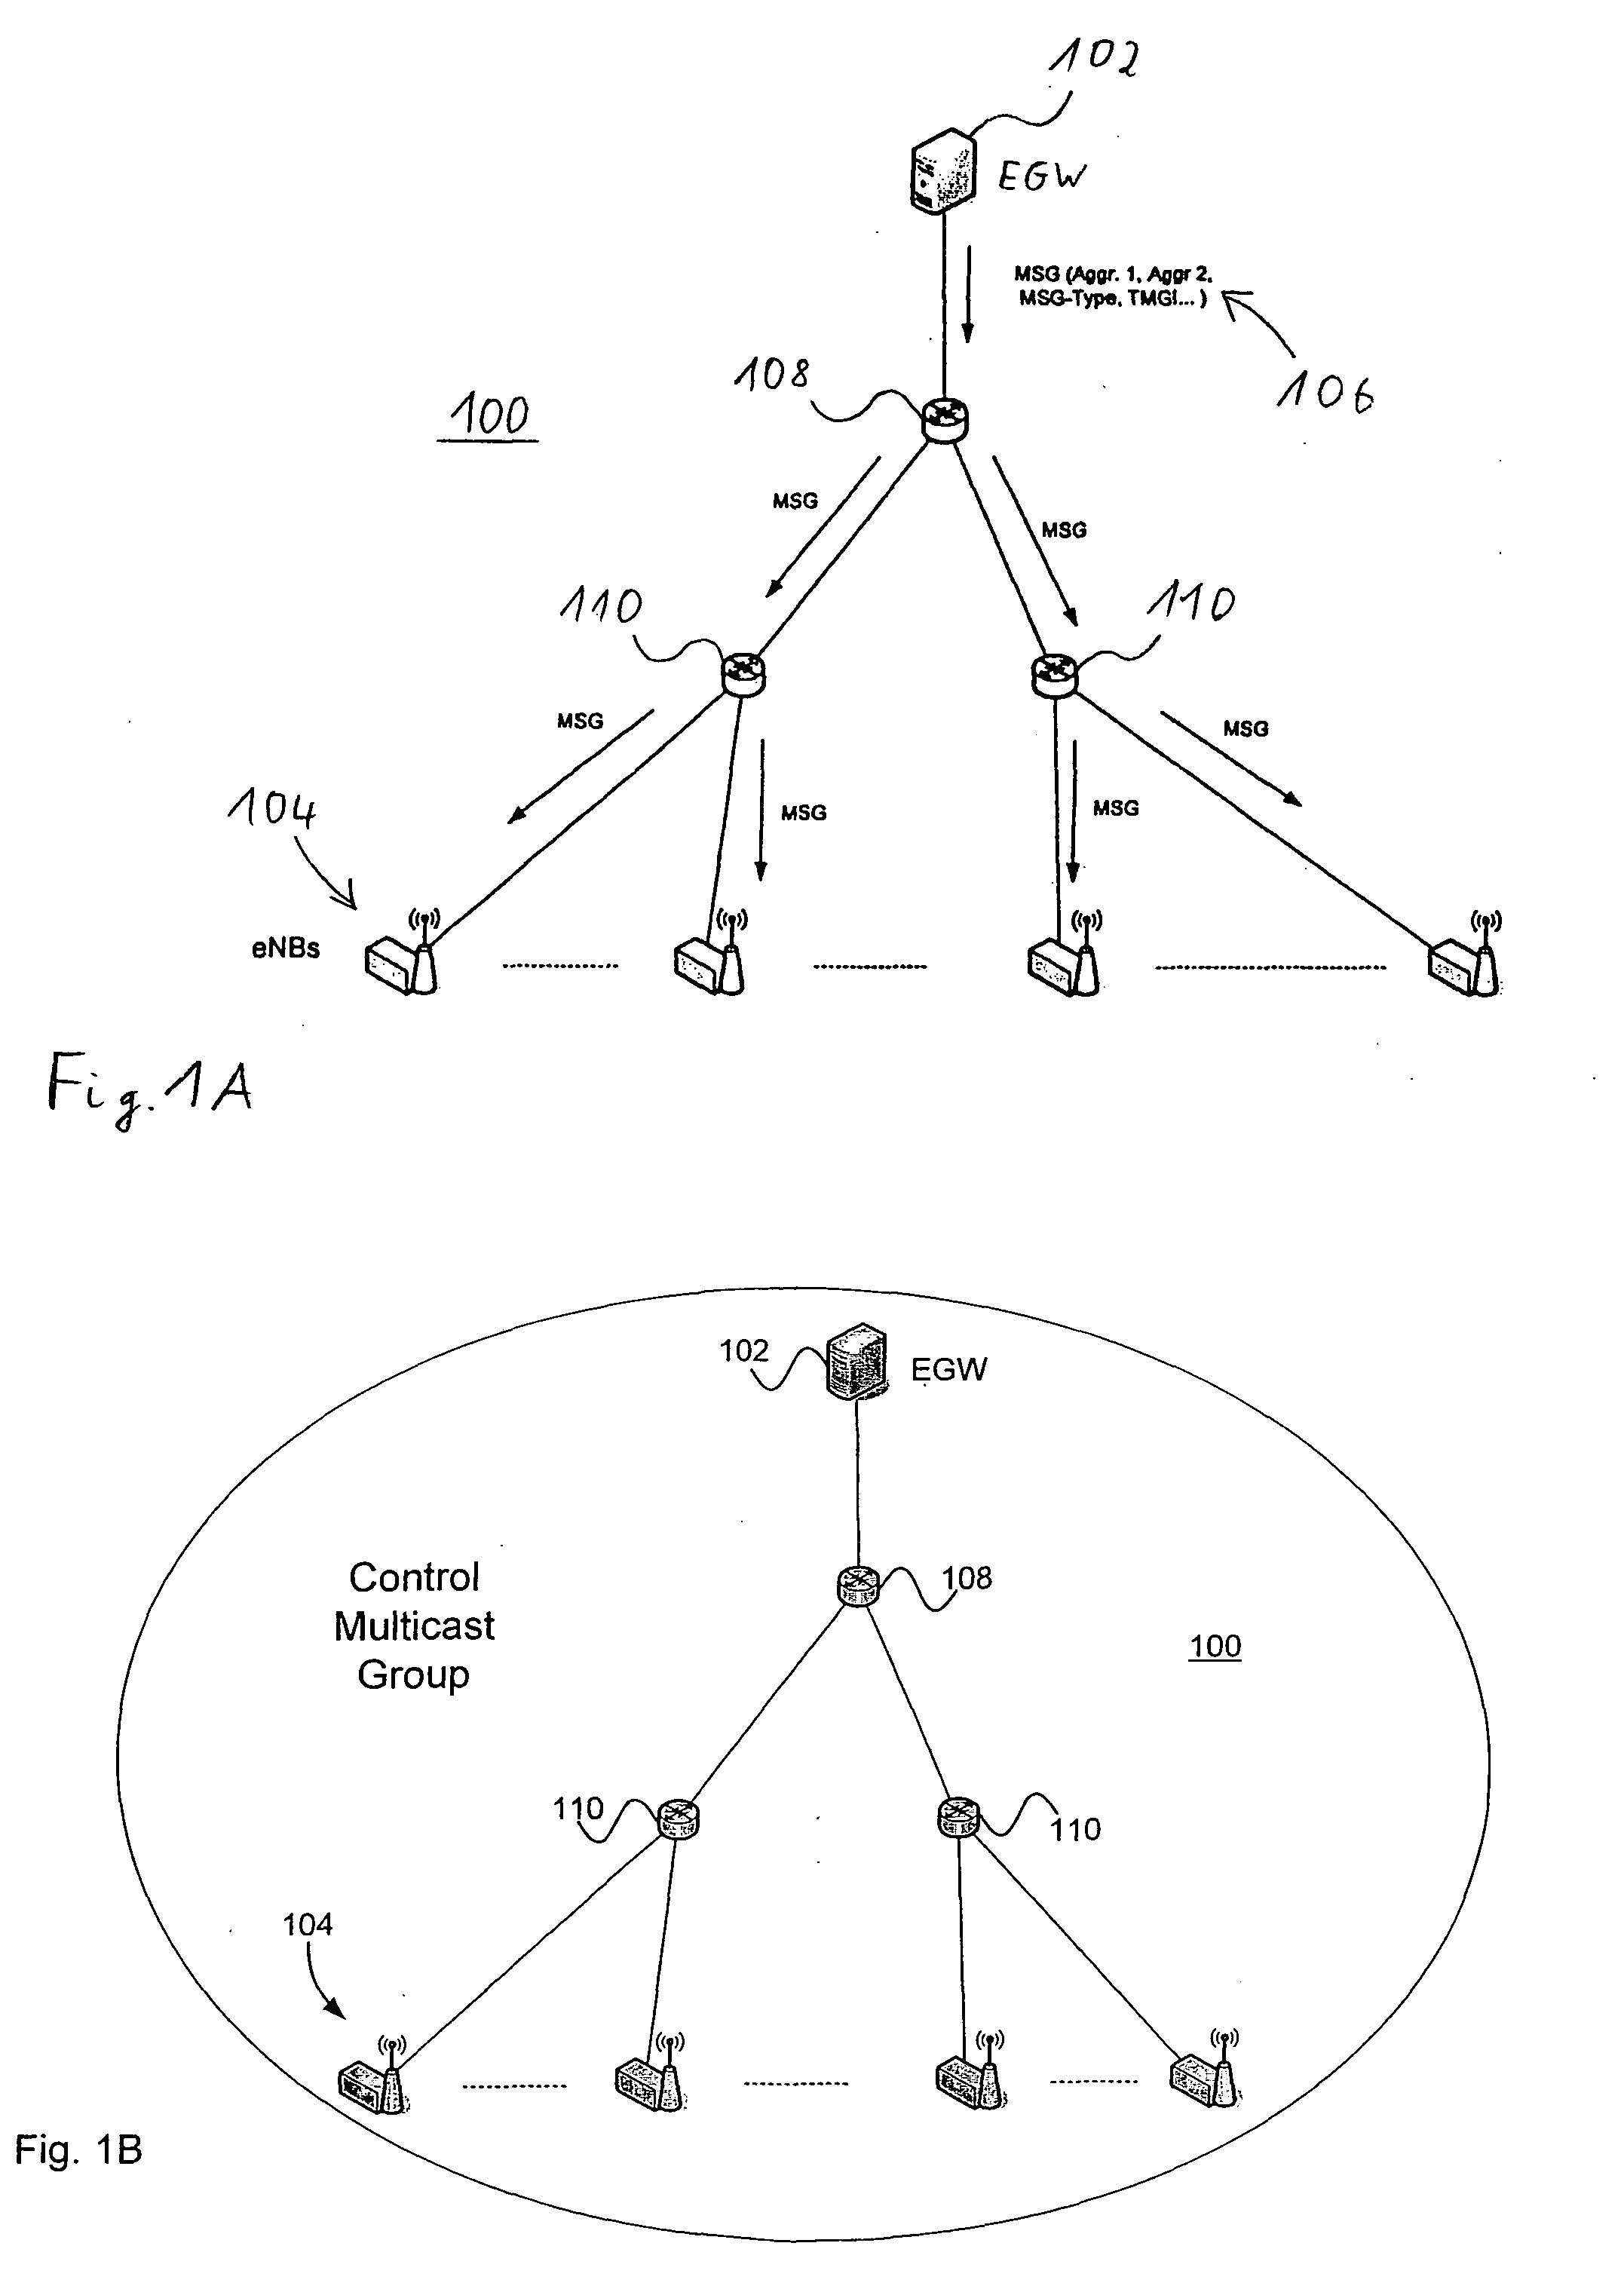 Signalling Control for a Point-To-Multipoint Content Transmission Network